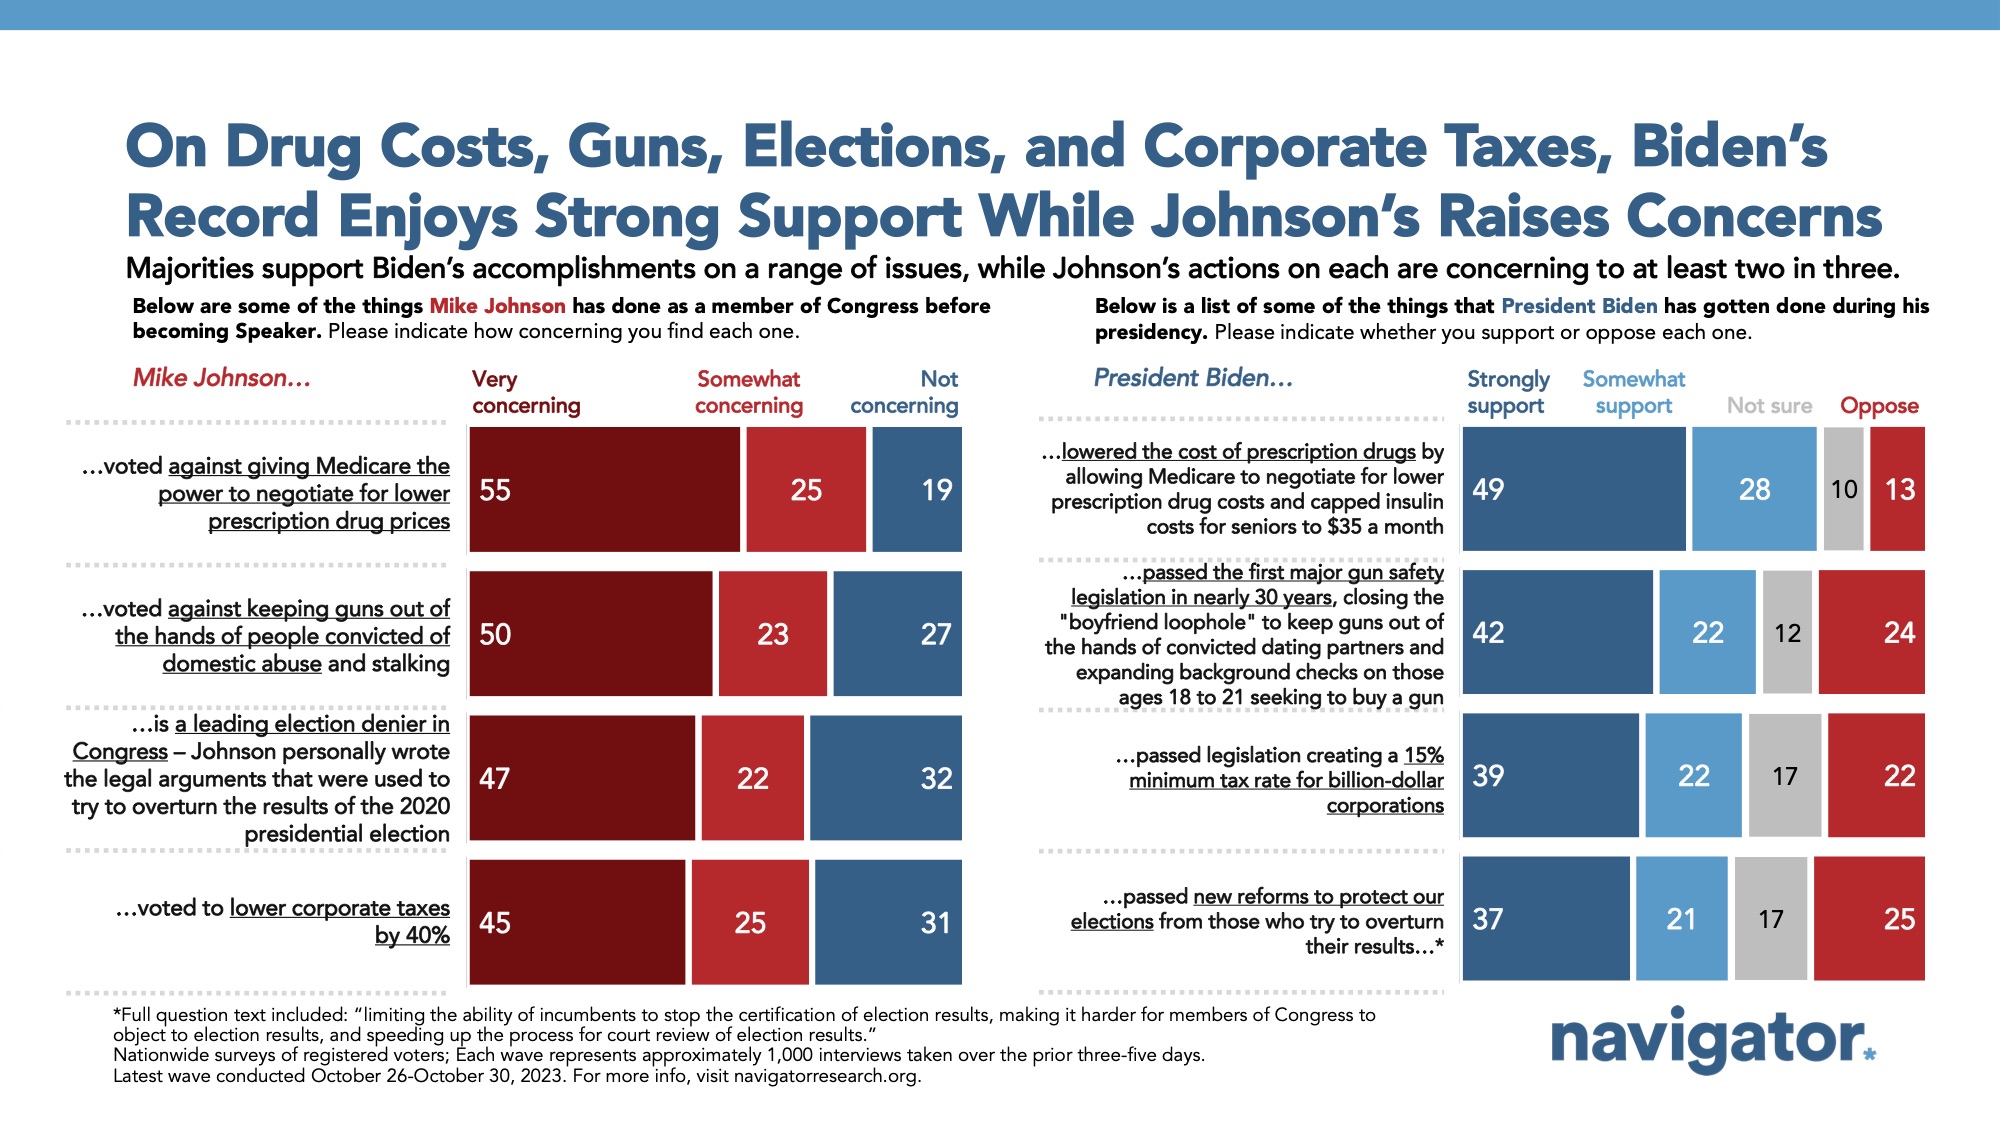 Bar graph of polling data from Navigator Research. Title: On Drug Costs, Guns, Elections, and Corporate Taxes, Biden’s Record Enjoys Strong Support While Johnson’s Raises Concerns